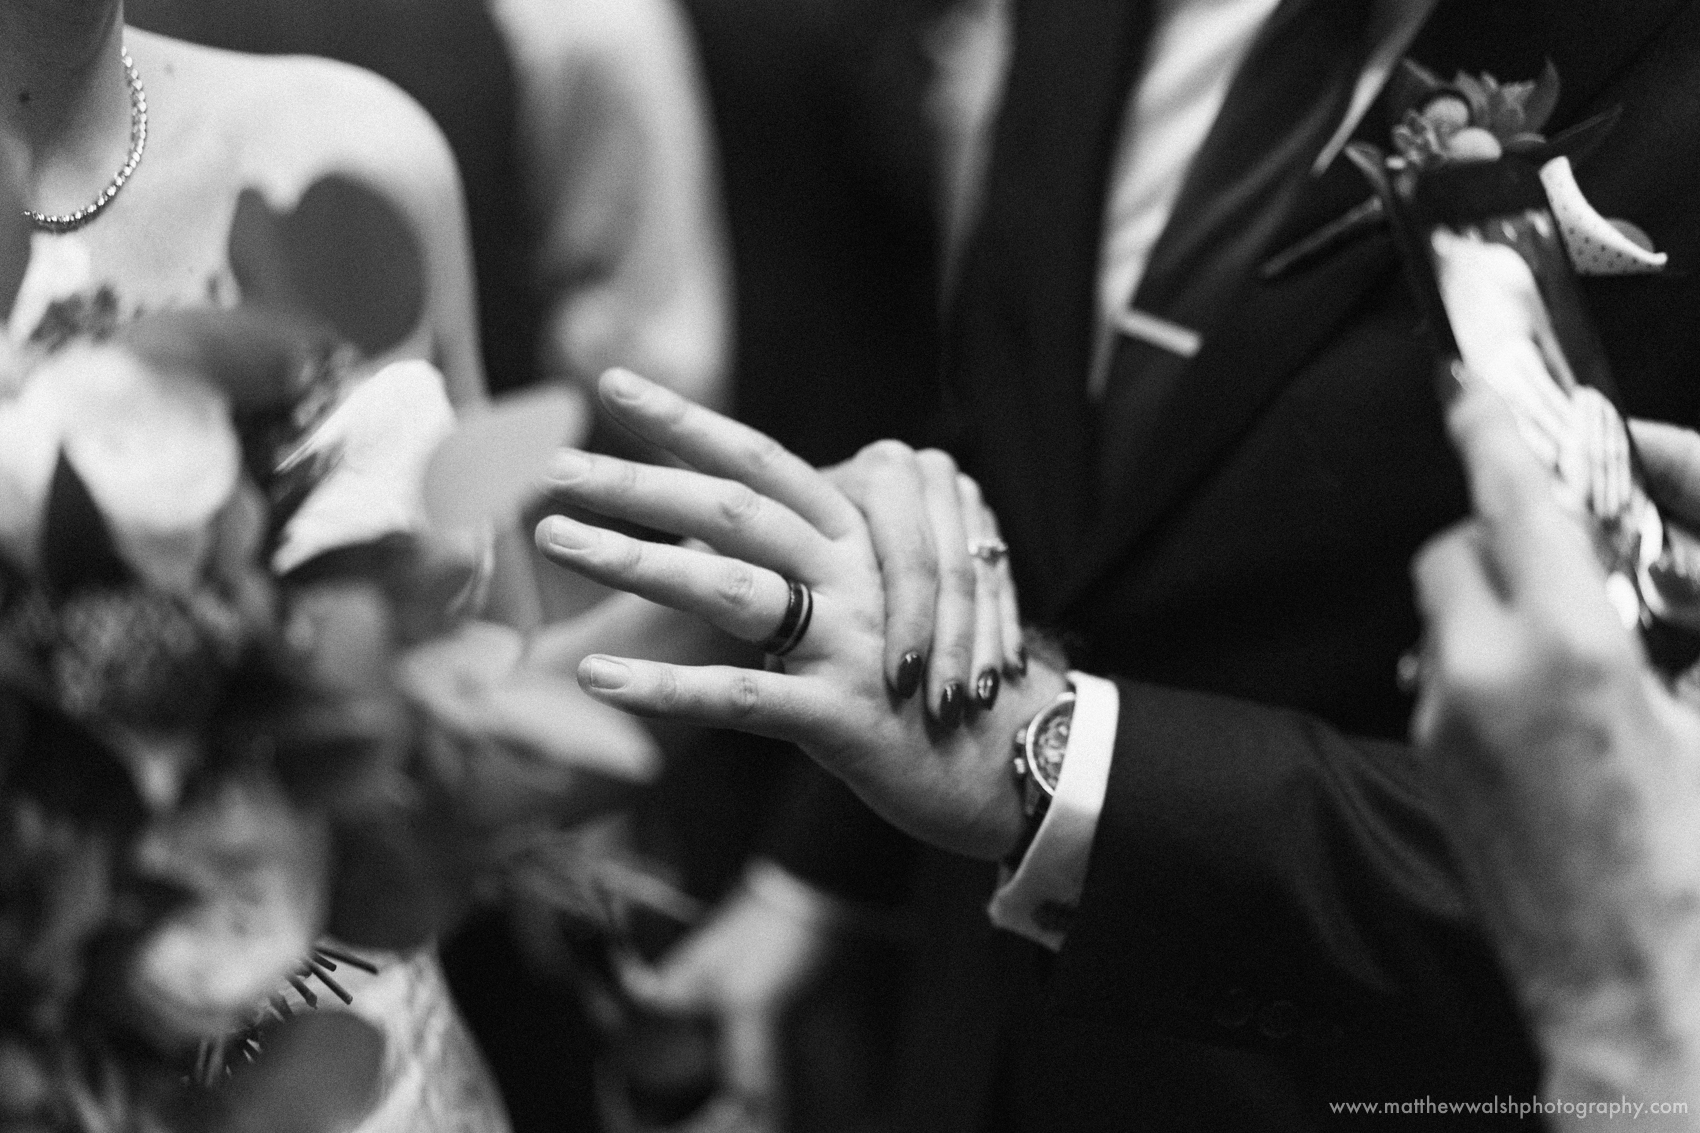 The newly wed couple show off their wedding rings to an emotional yet happy guest